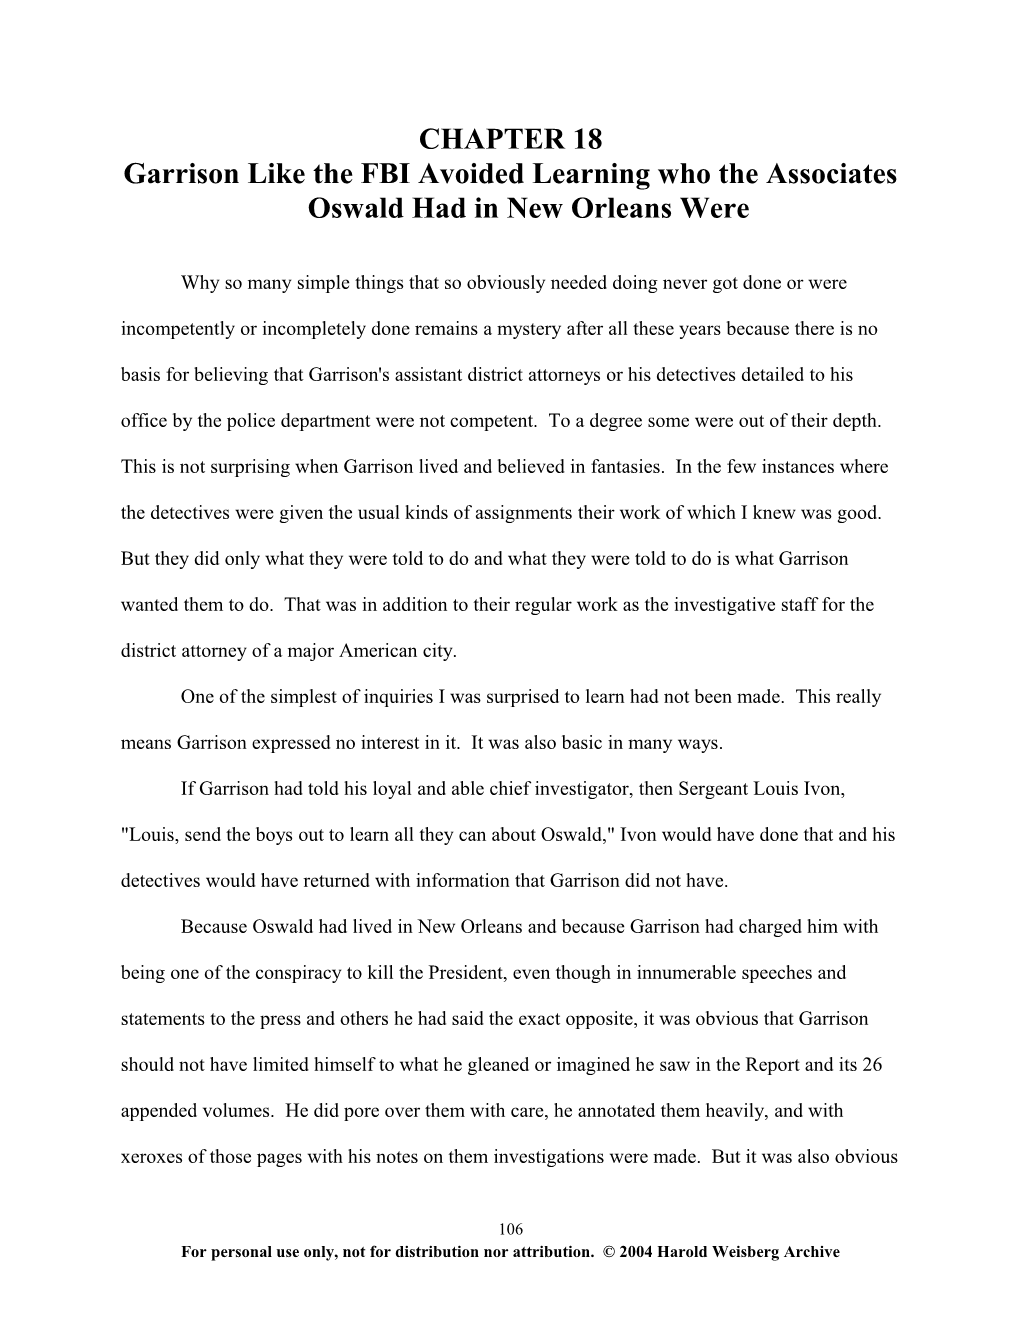 Garrison Like the FBI Avoided Learning Who the Associates Oswald Had in New Orleans Were